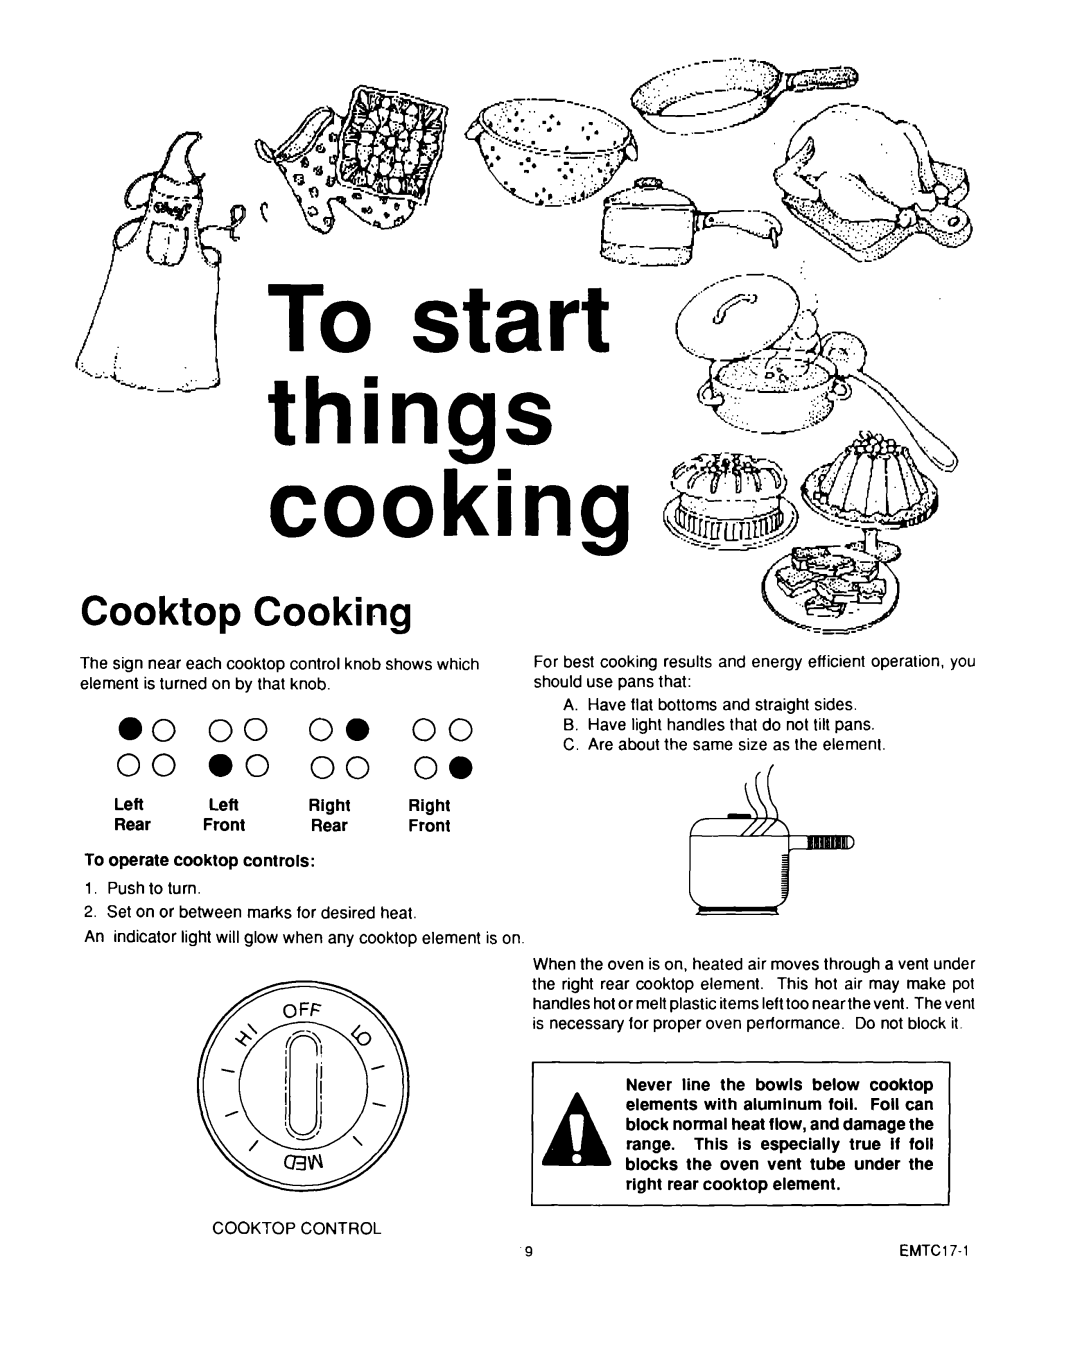 Roper D975 owner manual Cooktop Cooking, To start things cooking 